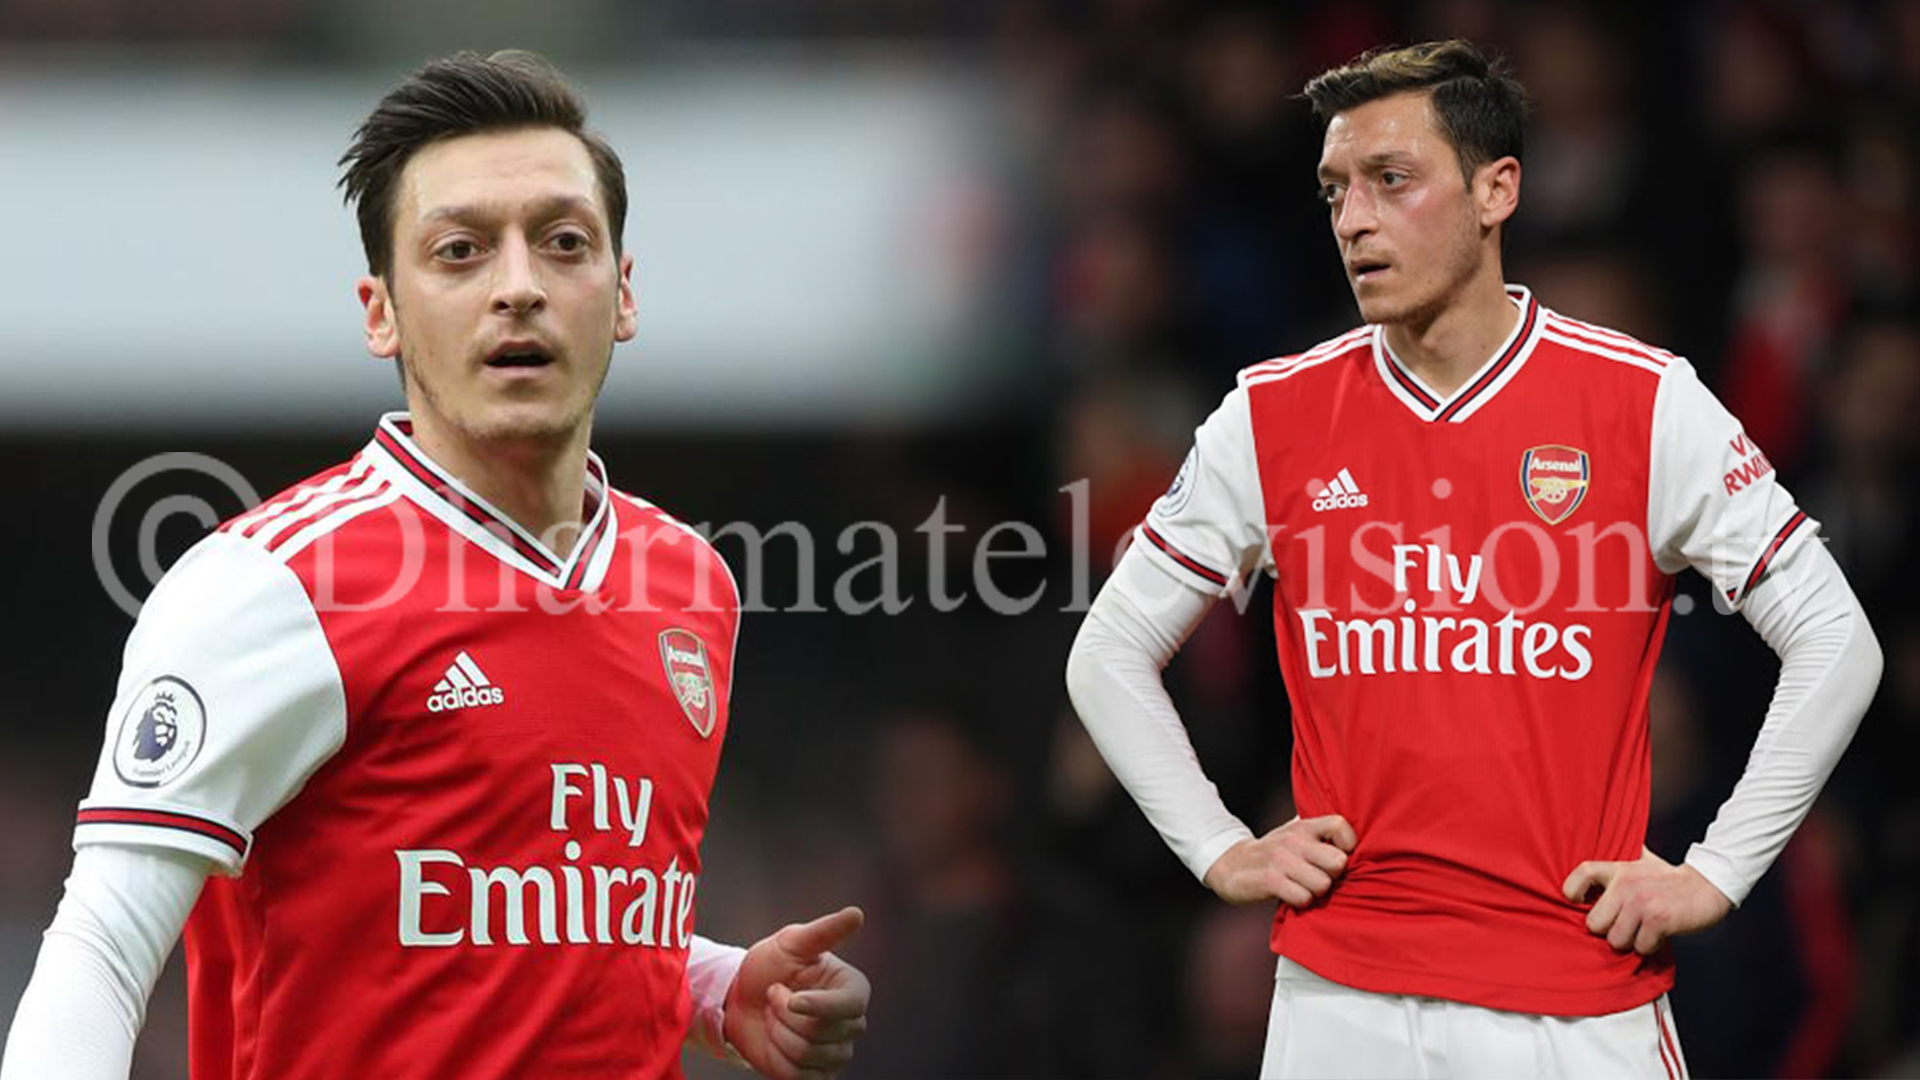 Ozil has no regrets about joining Arsenal